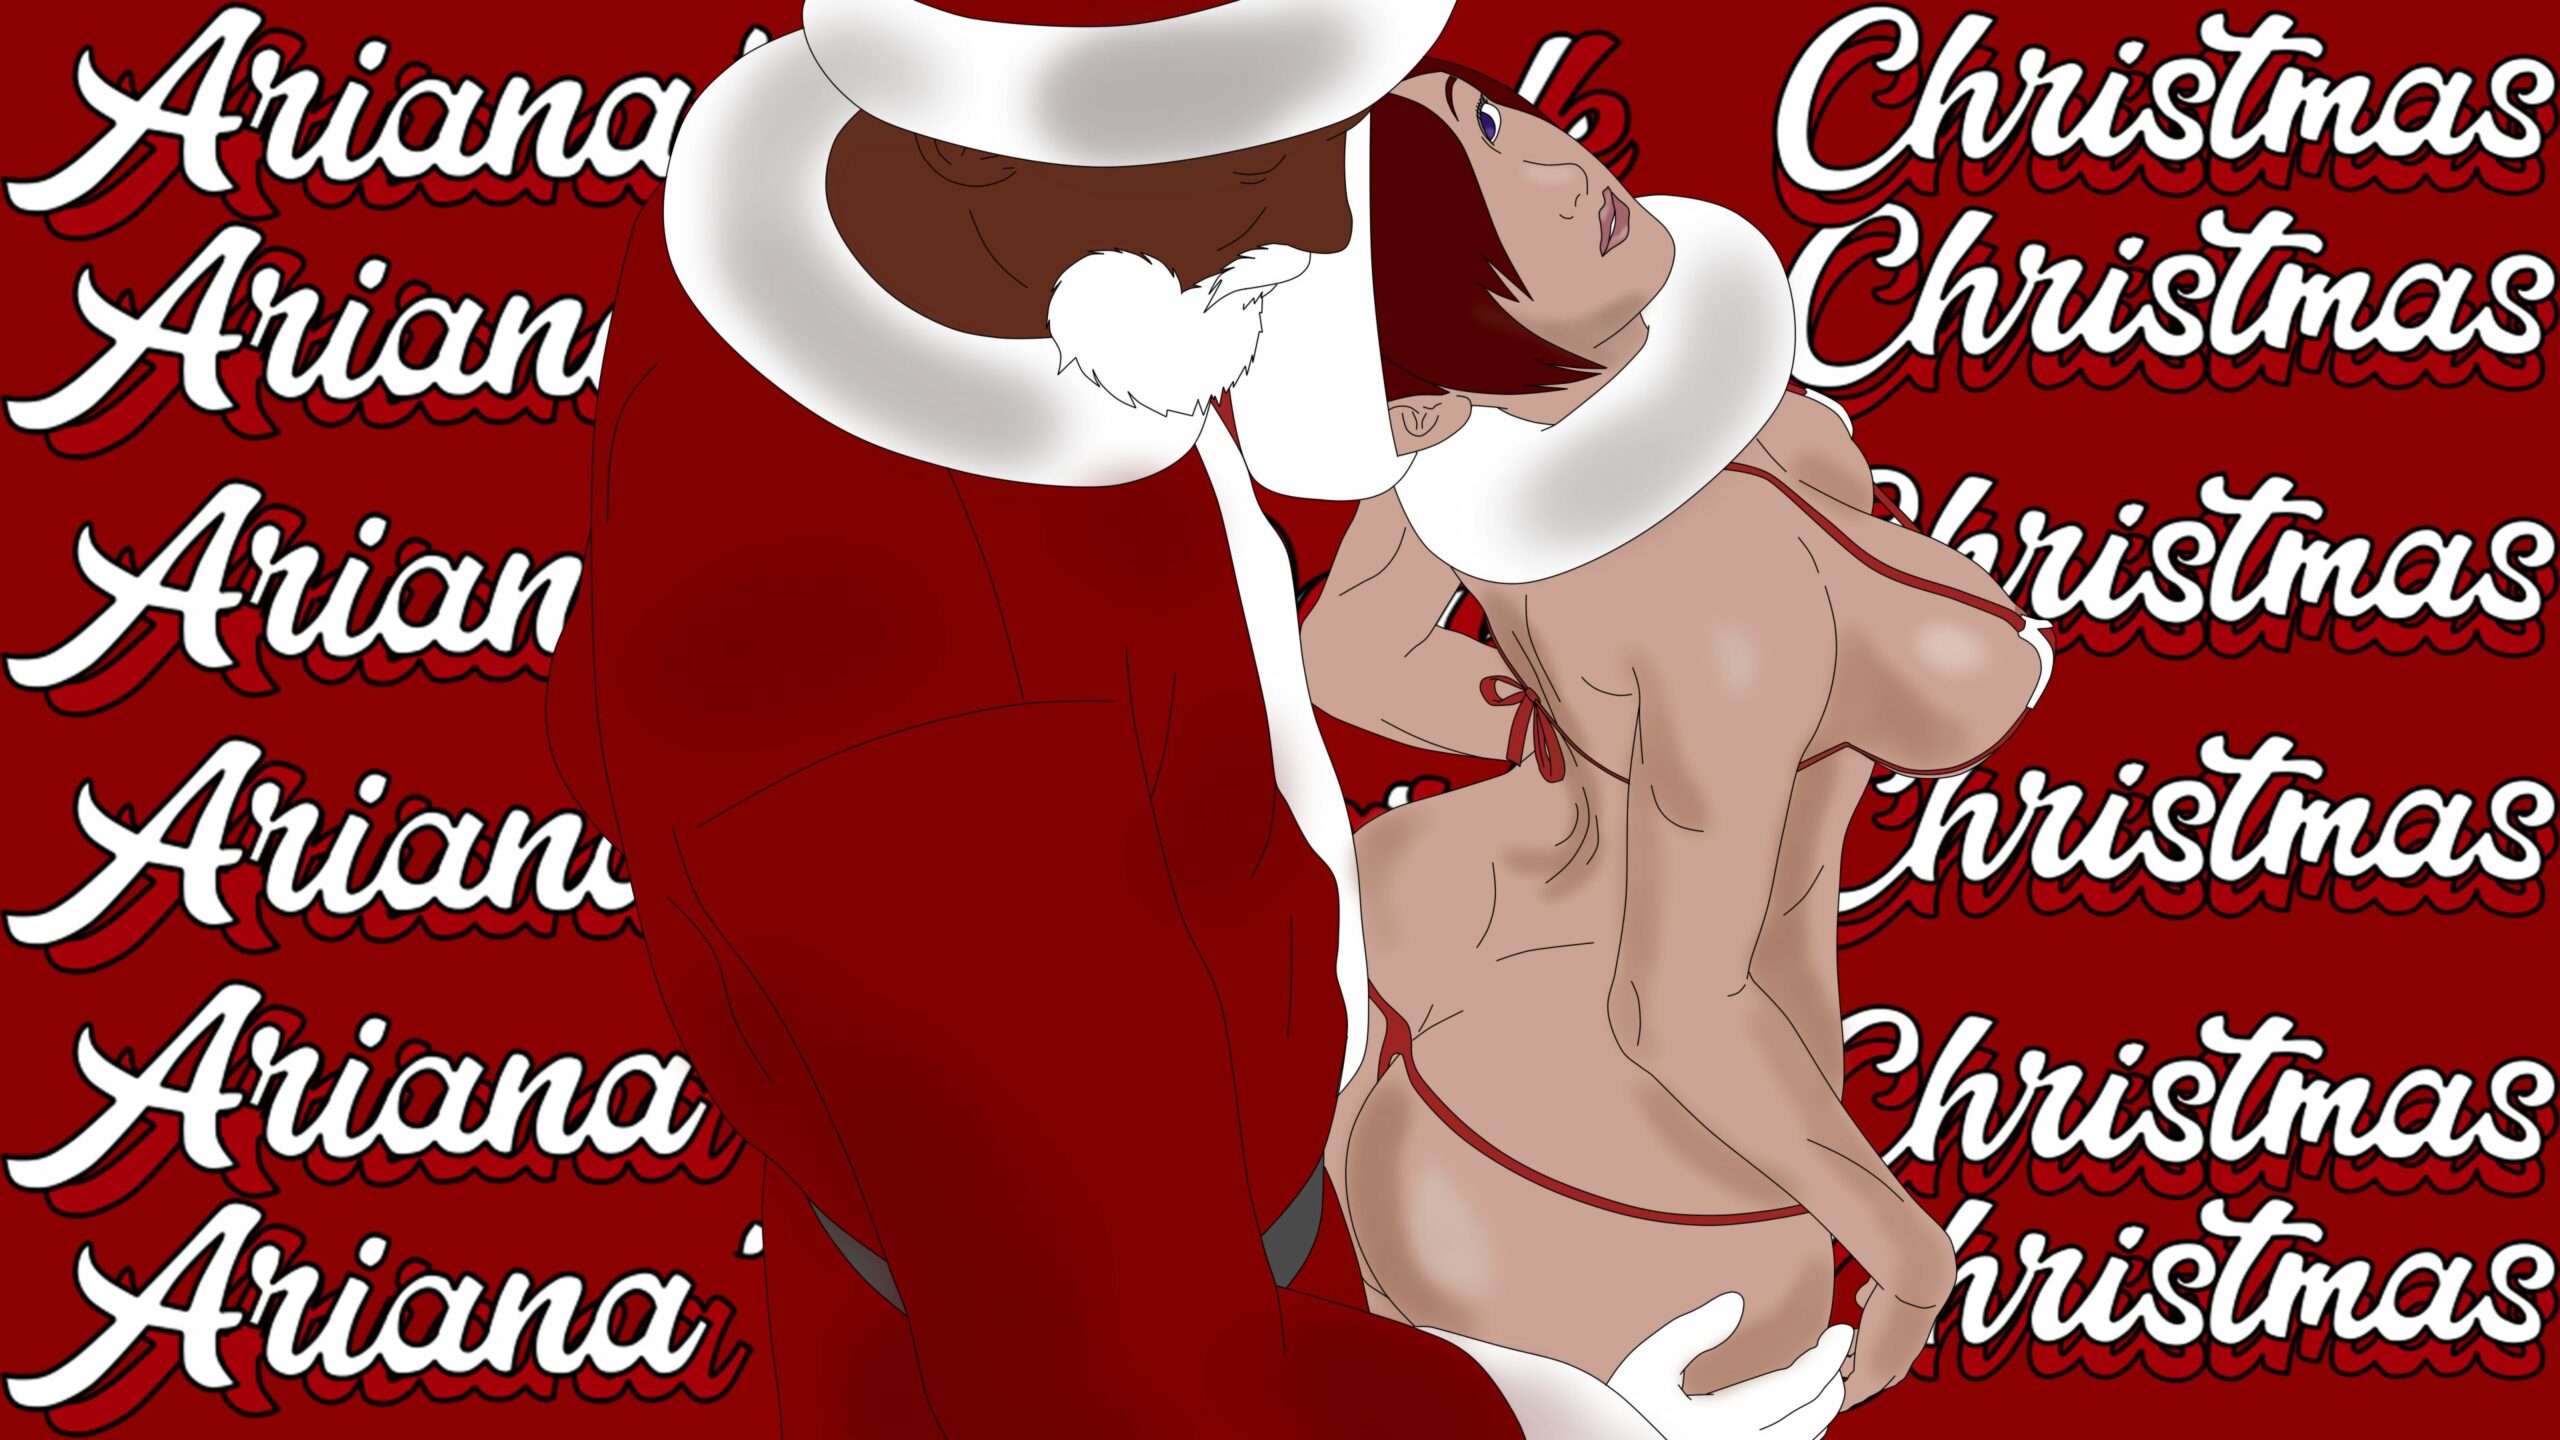 Ariana’s Dark Christmas [Finished] - Version: Final